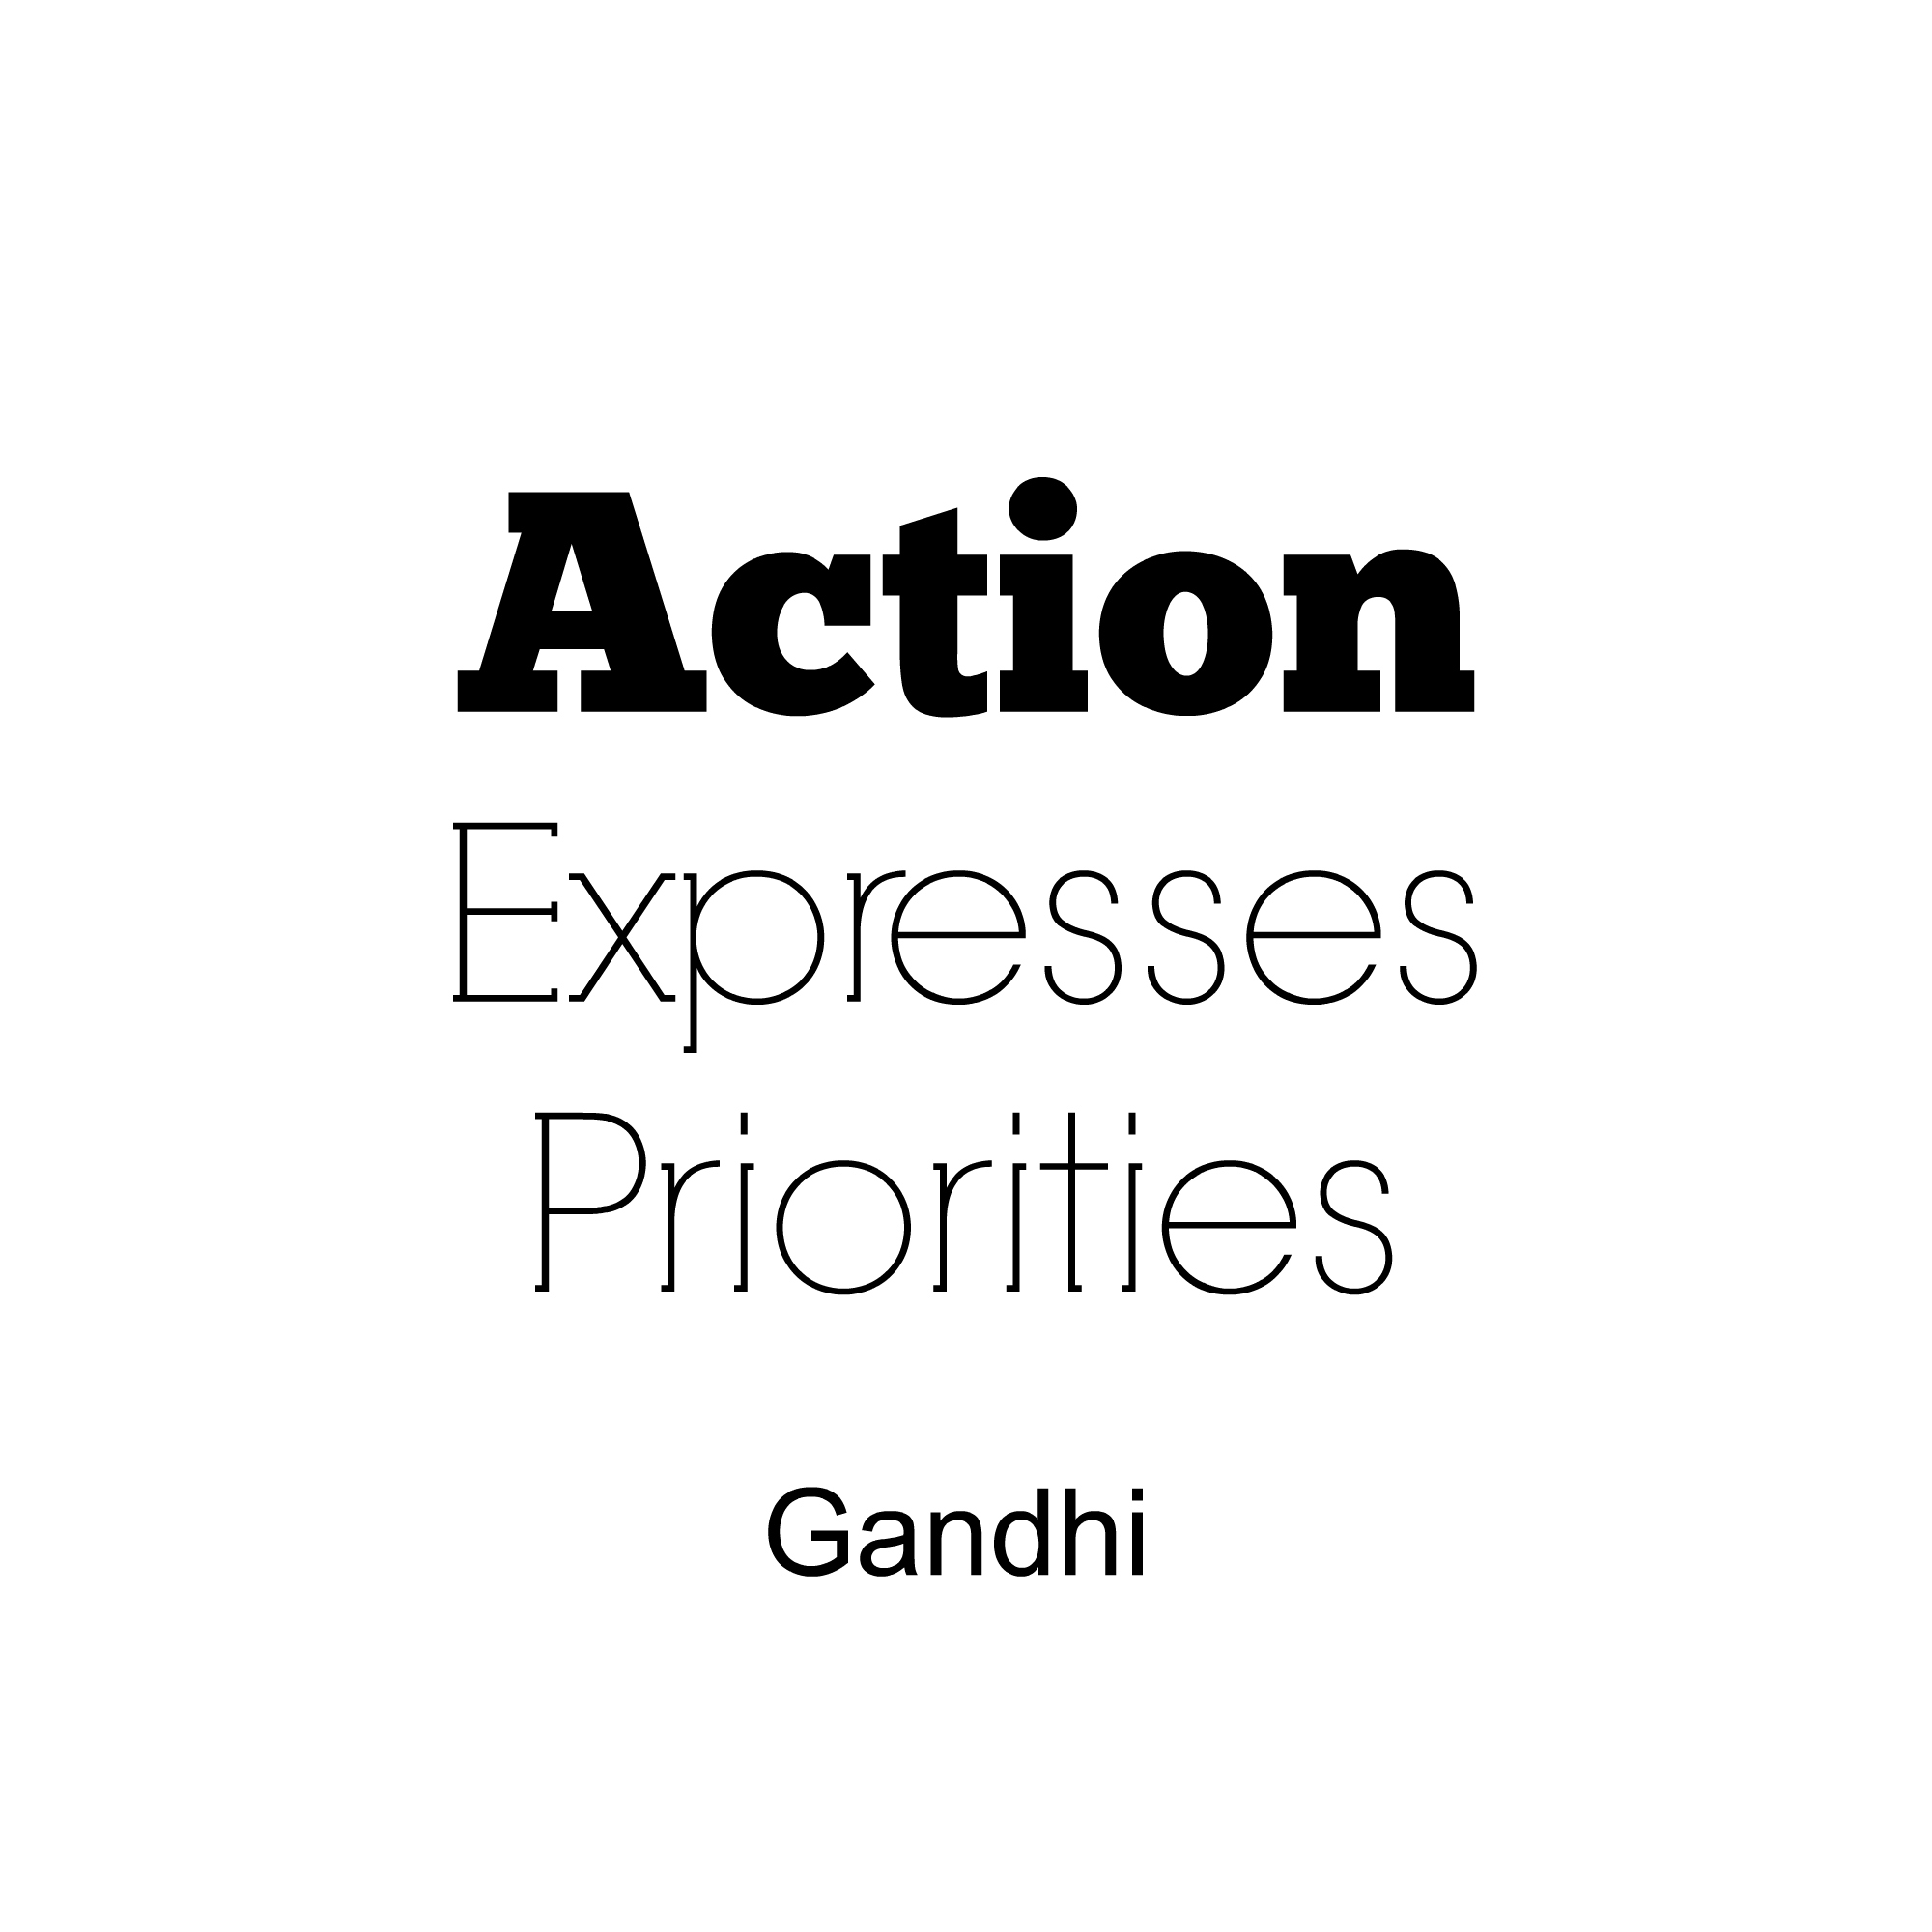 Action expresses priorities (24)